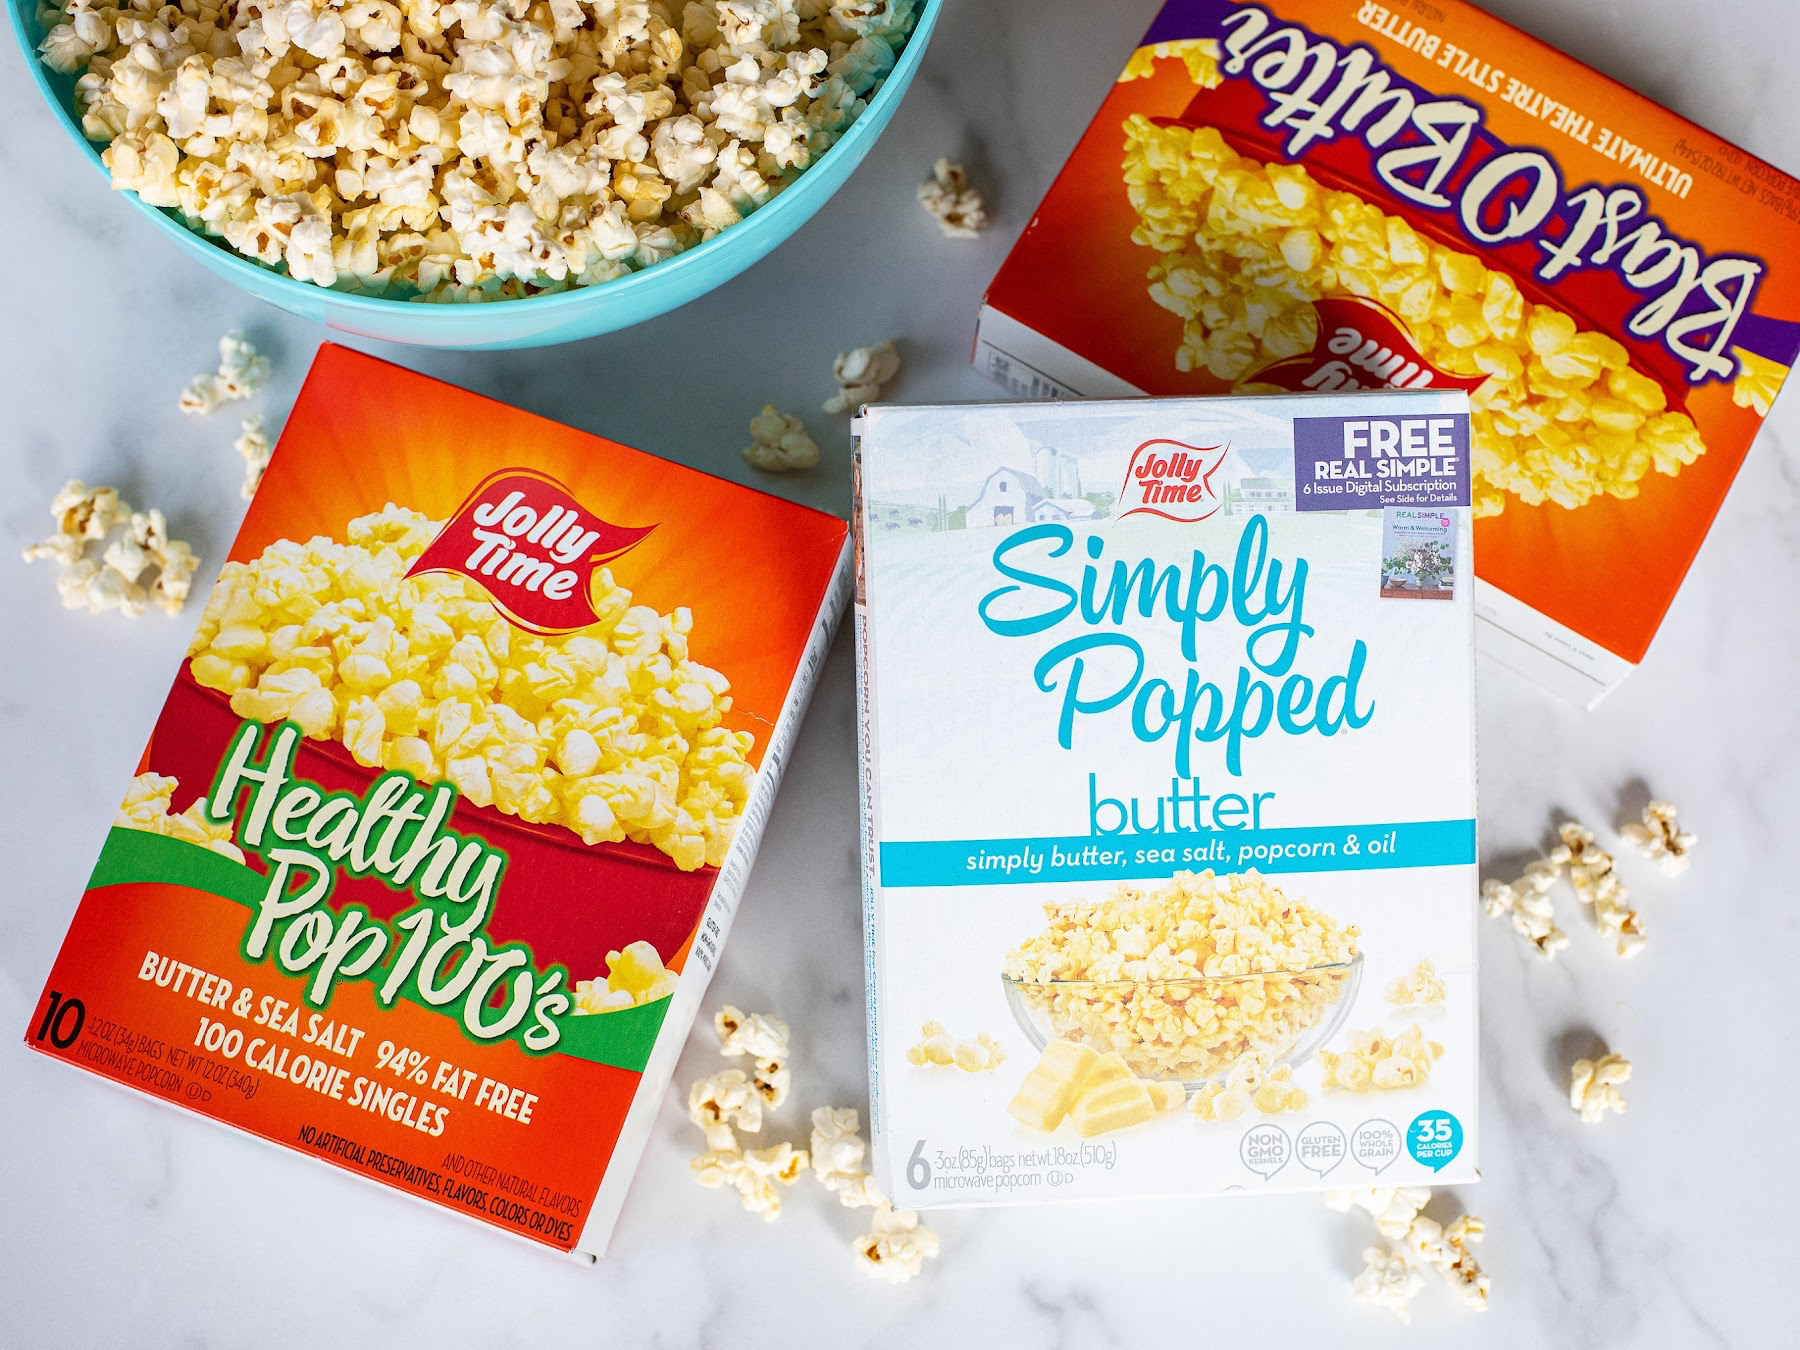 Make Some Super Fun Bunny Popcorn Ball Treats With JOLLY TIME Pop Corn This Easter on I Heart Publix 1